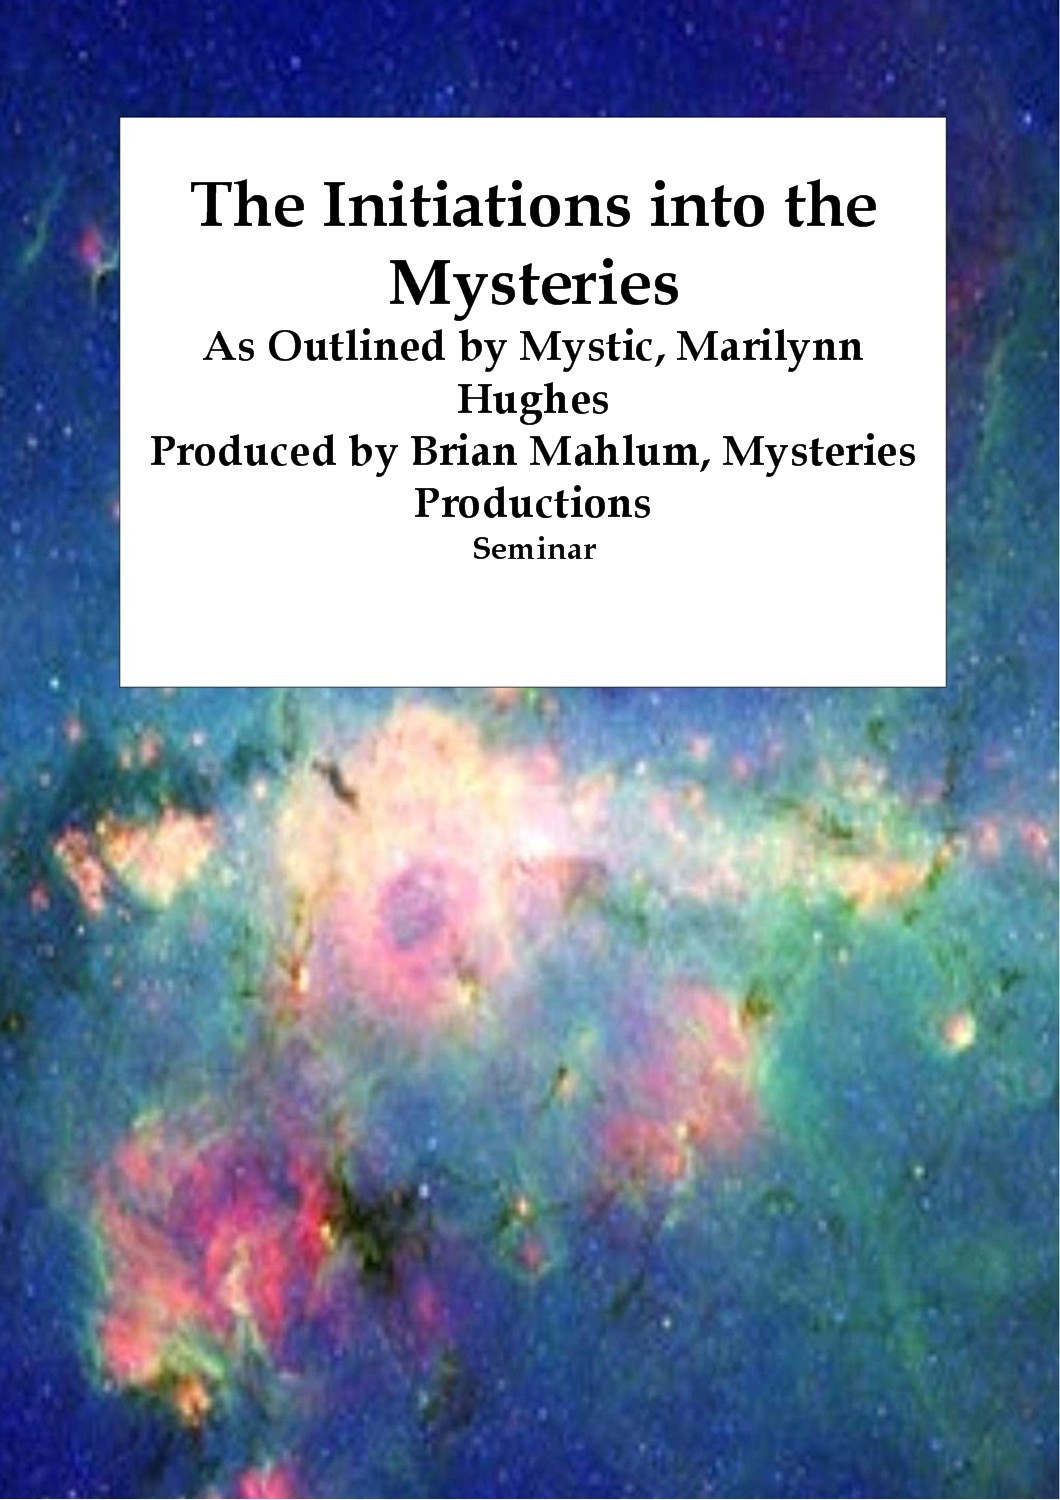 Seminar. As Outlined by Mystic, Marilynn Hughes of 'The Out-of-Body Travel Foundation.' Produced by Brian Mahlum, Mysteries Productions